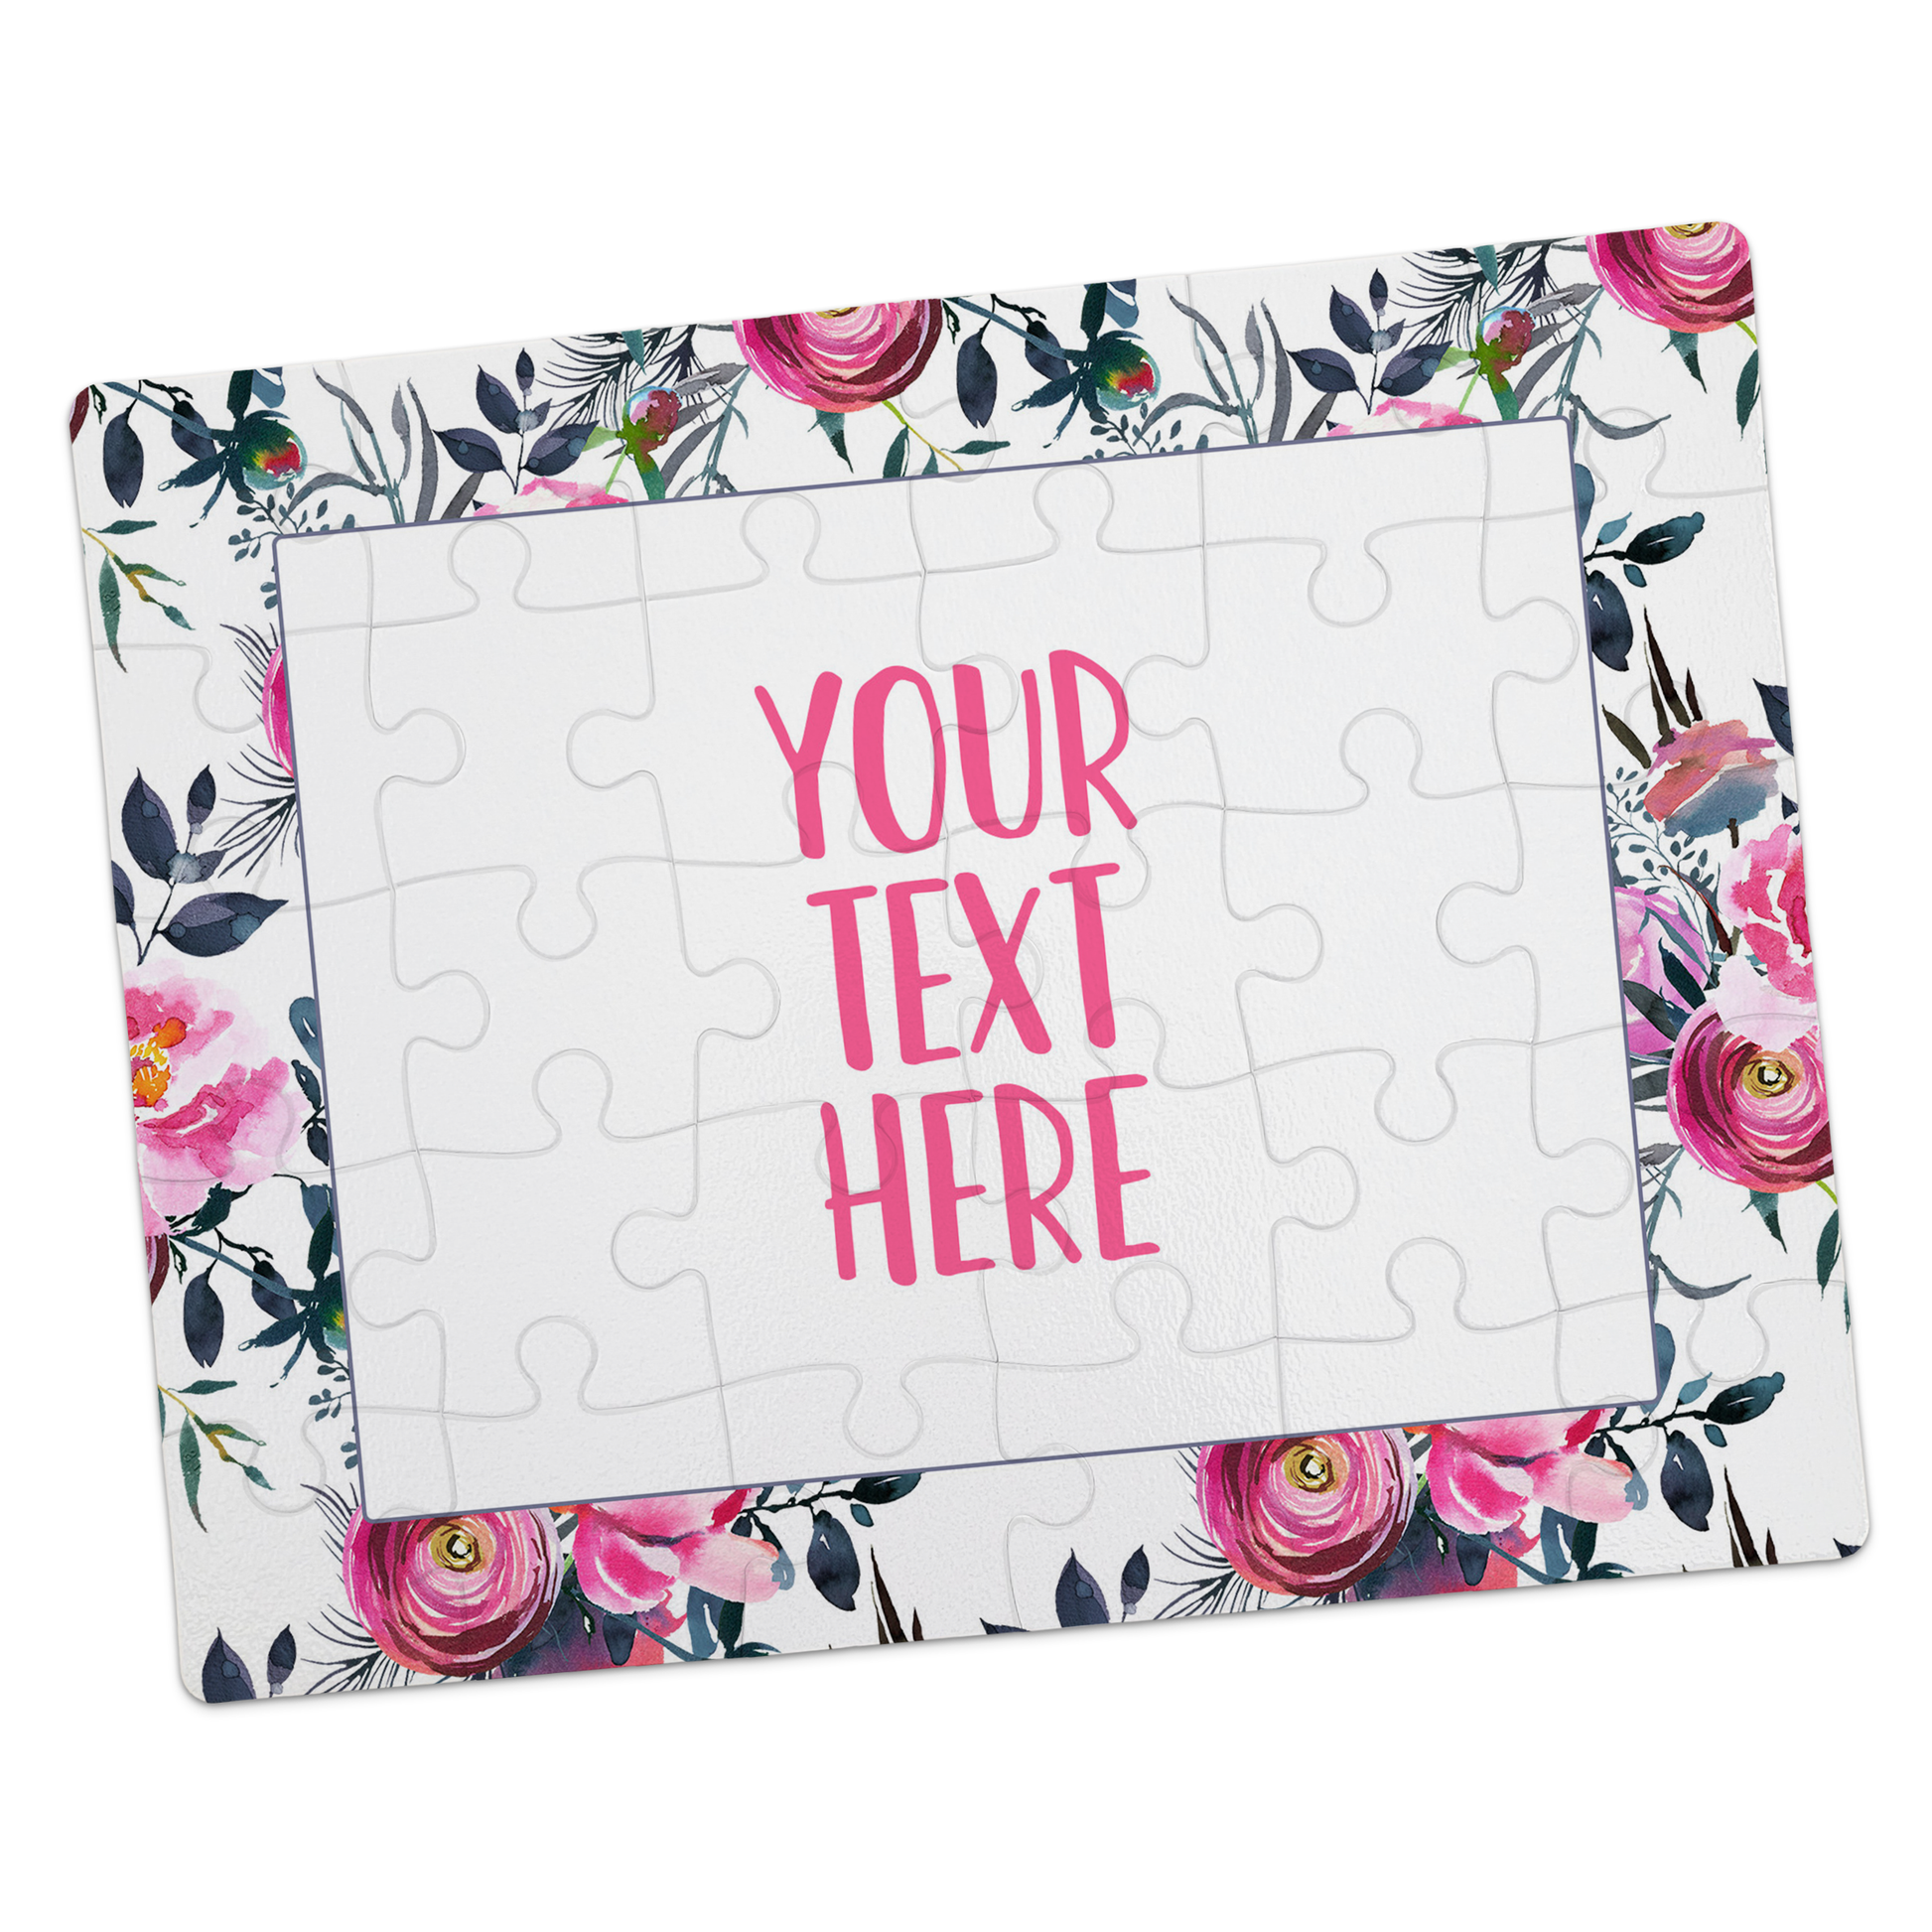 Create Your Own Puzzle - Floral Design - CYOP0020